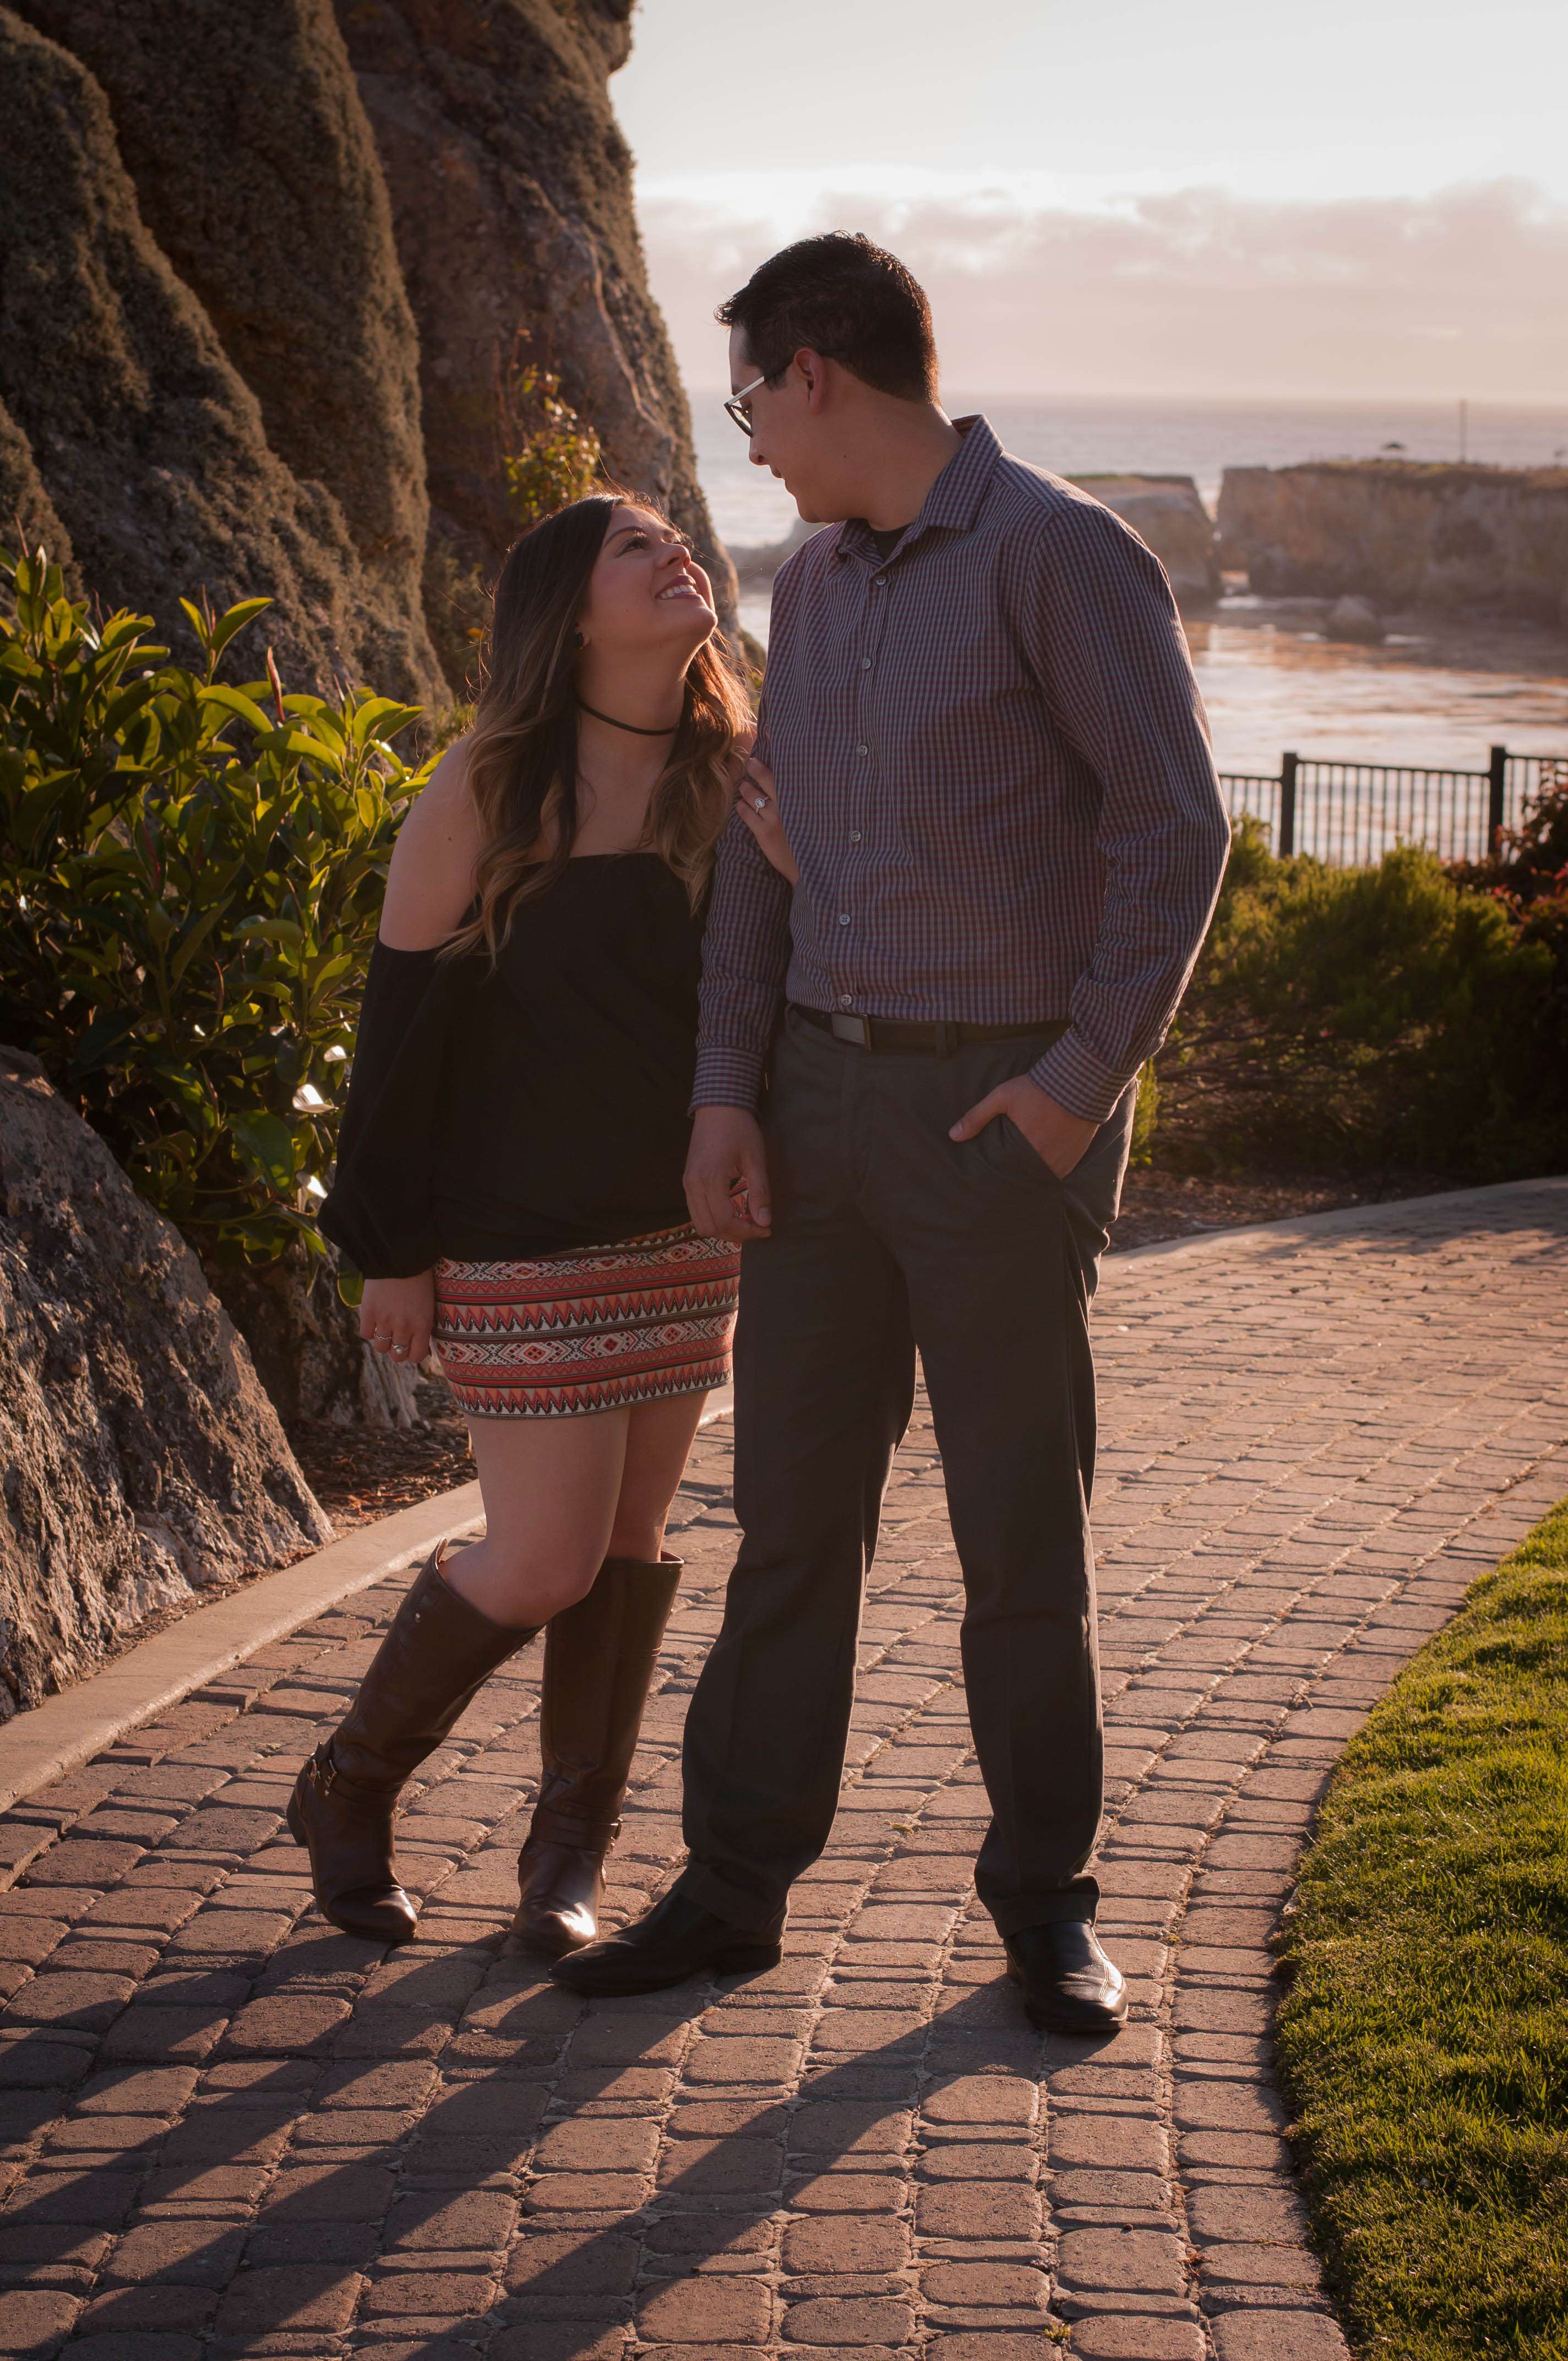 You are currently viewing Inn at the Cove Surprise Proposal, Pismo Beach